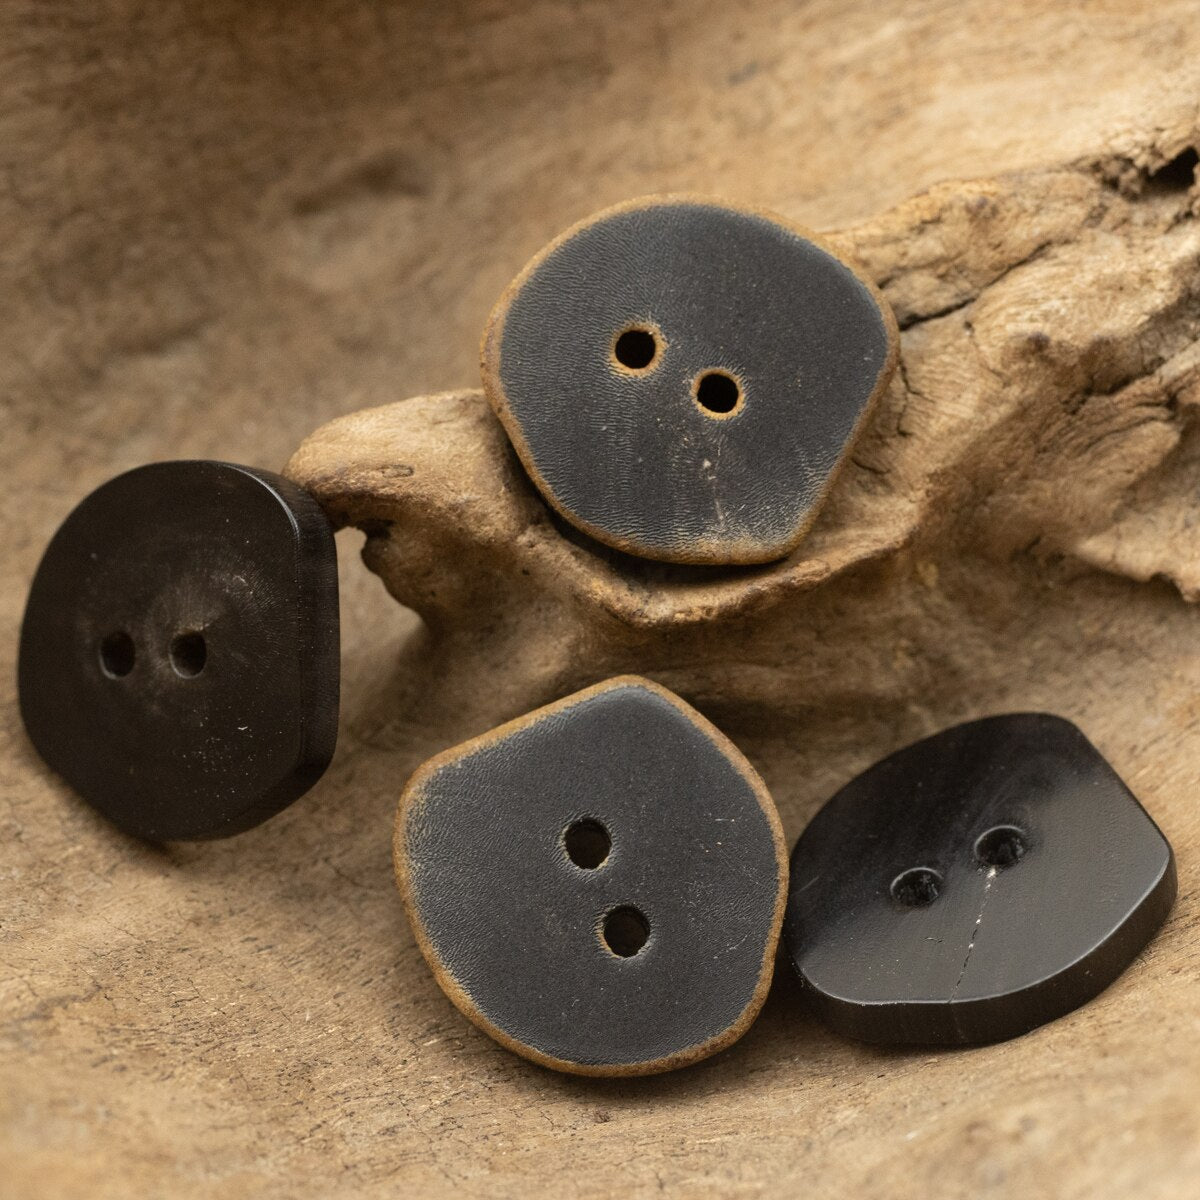 Irregular 2 Hole Buttons for Clothing Scorched Effect Cute Small Buttons